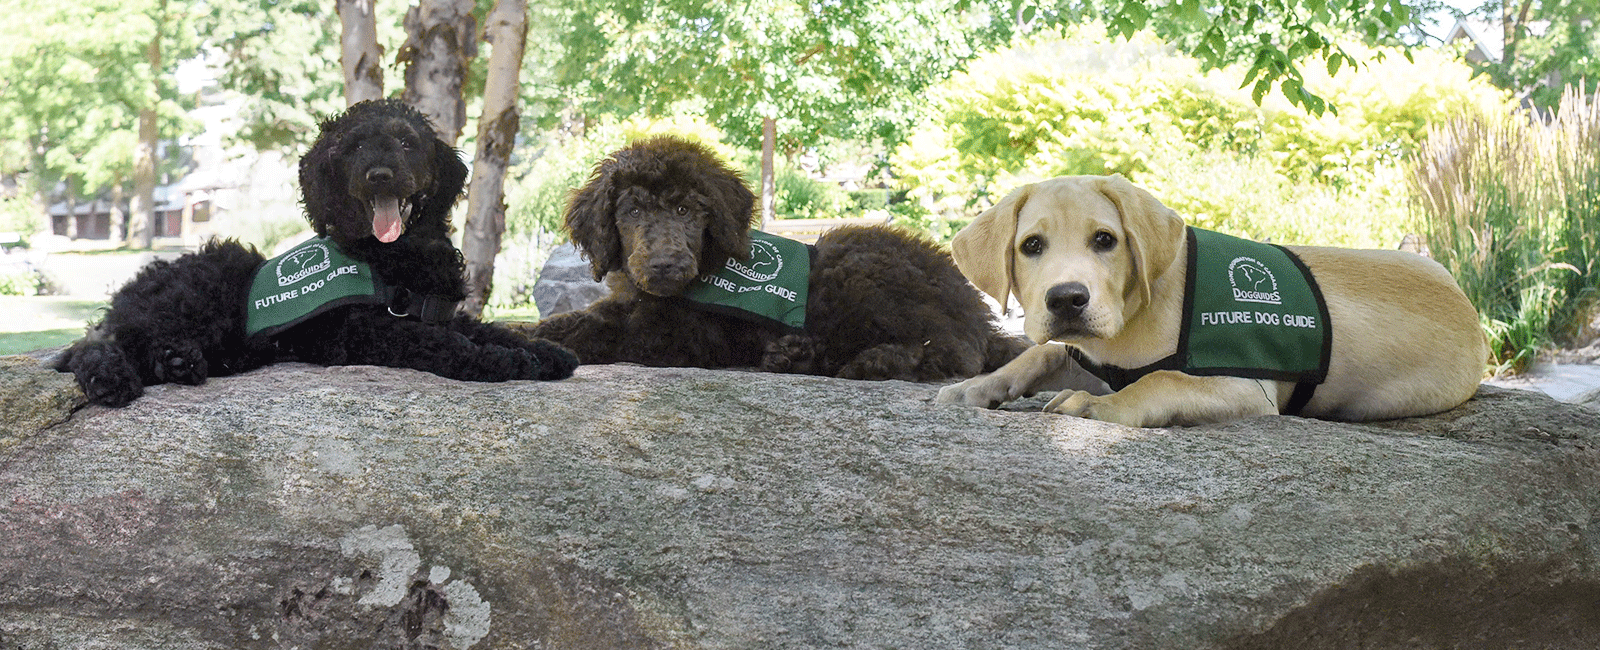 3 future Dog Guide puppies on a rock